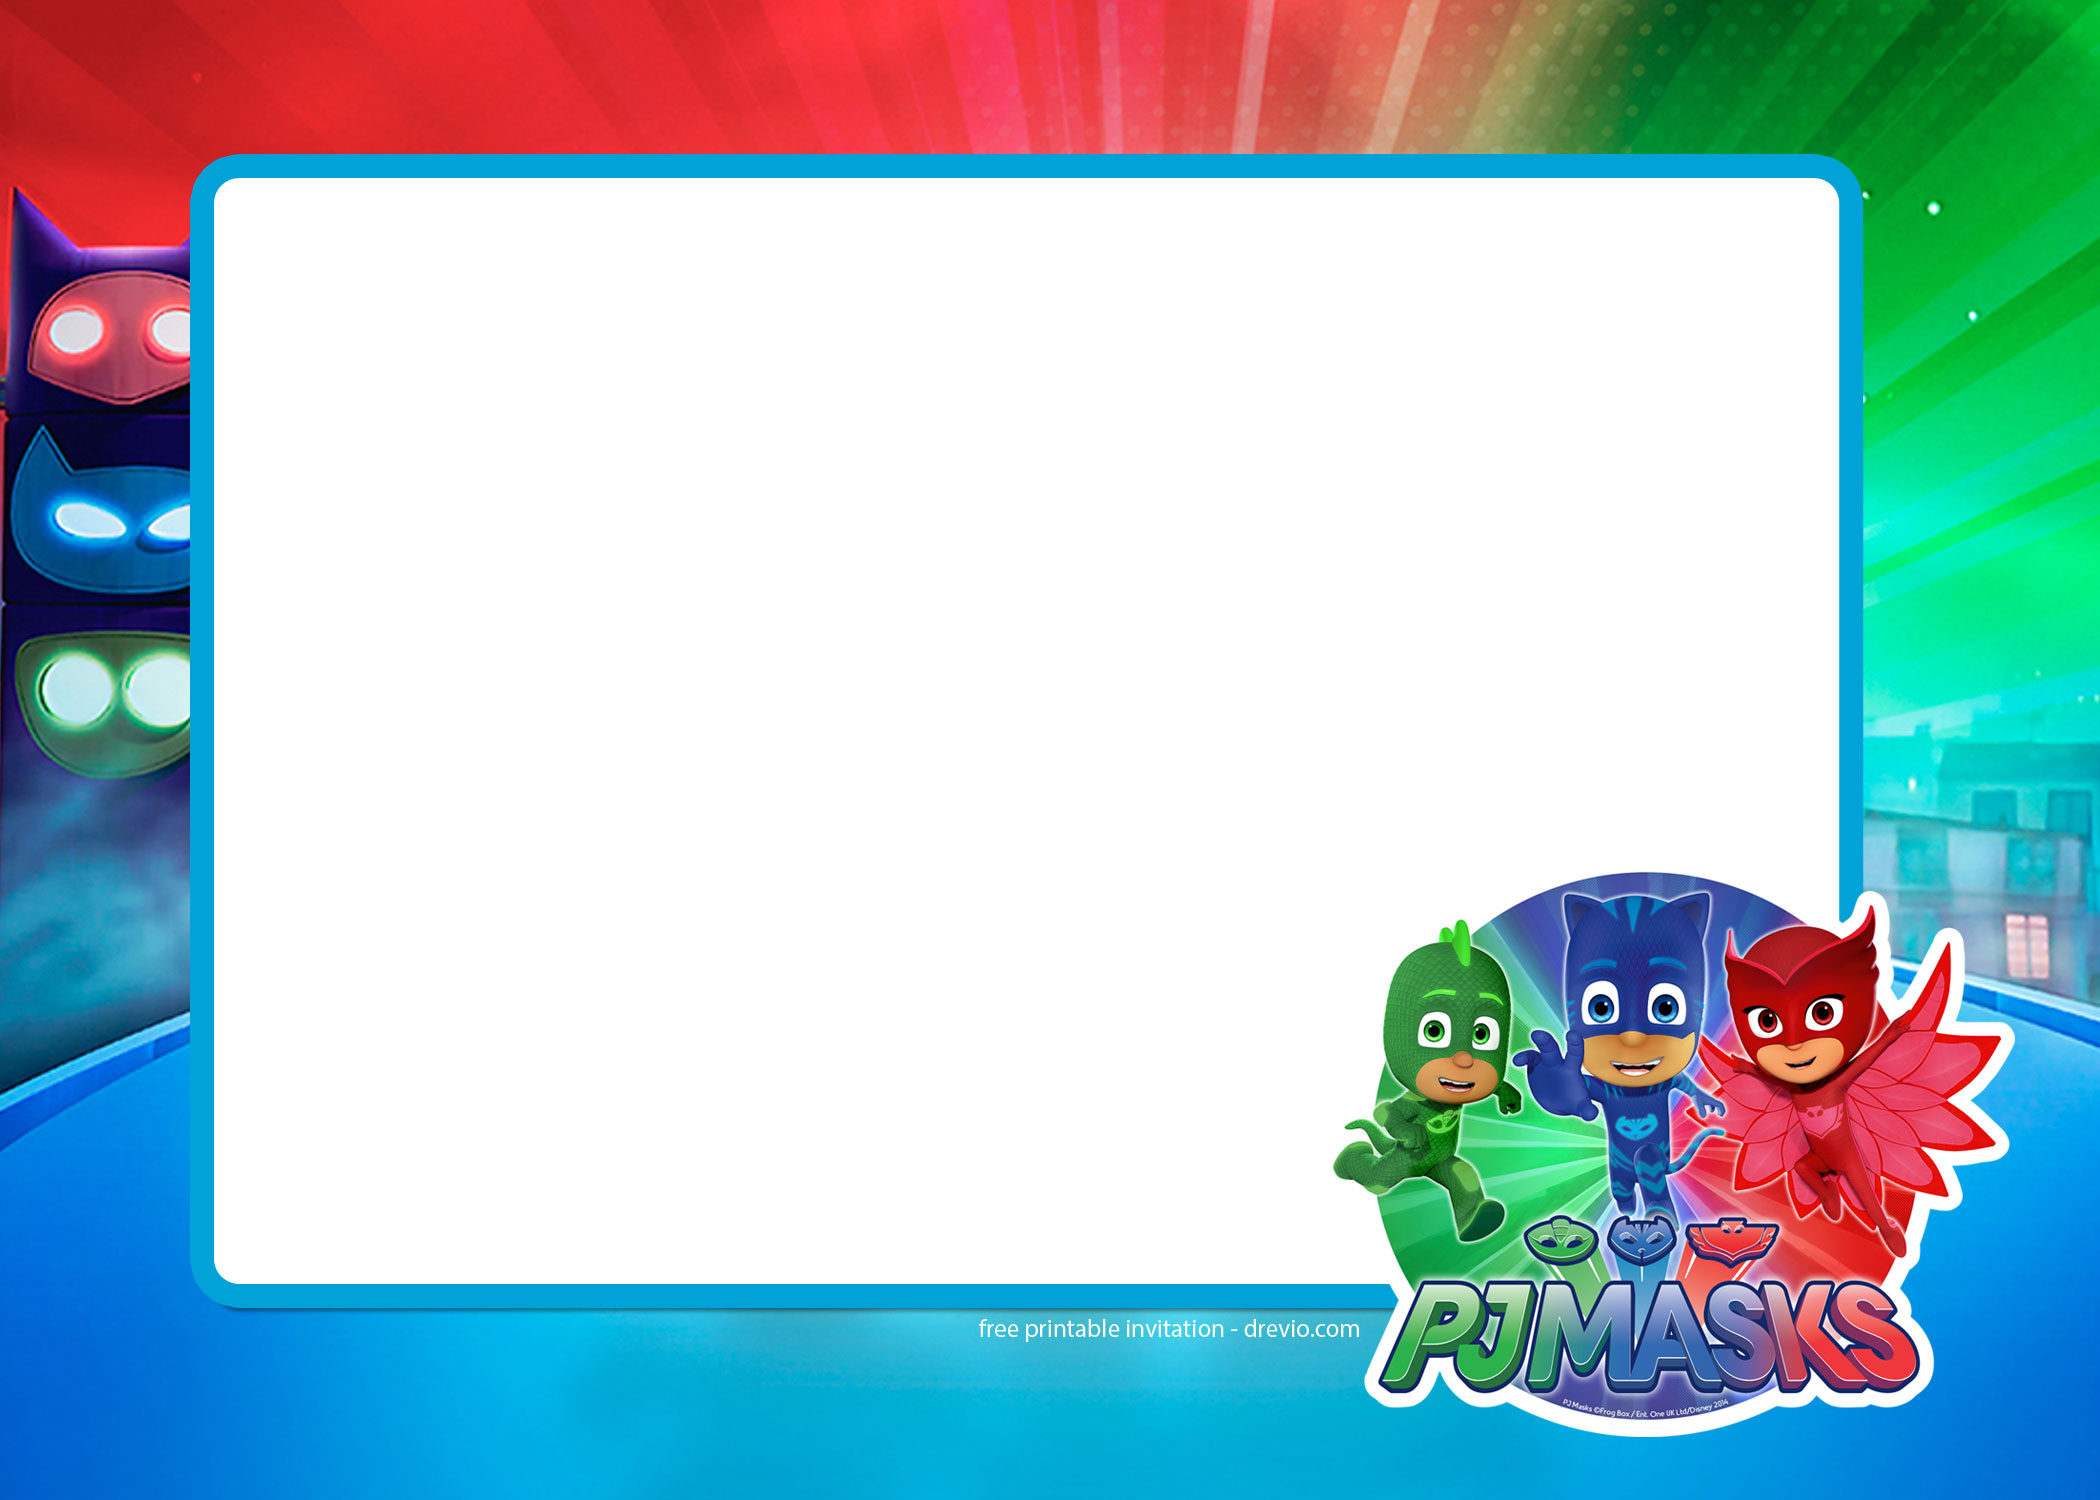 Download 21 pj-masks-wallpaper Could-make-an-invitation-with-this-template-My-Girls-Pj-.jpg